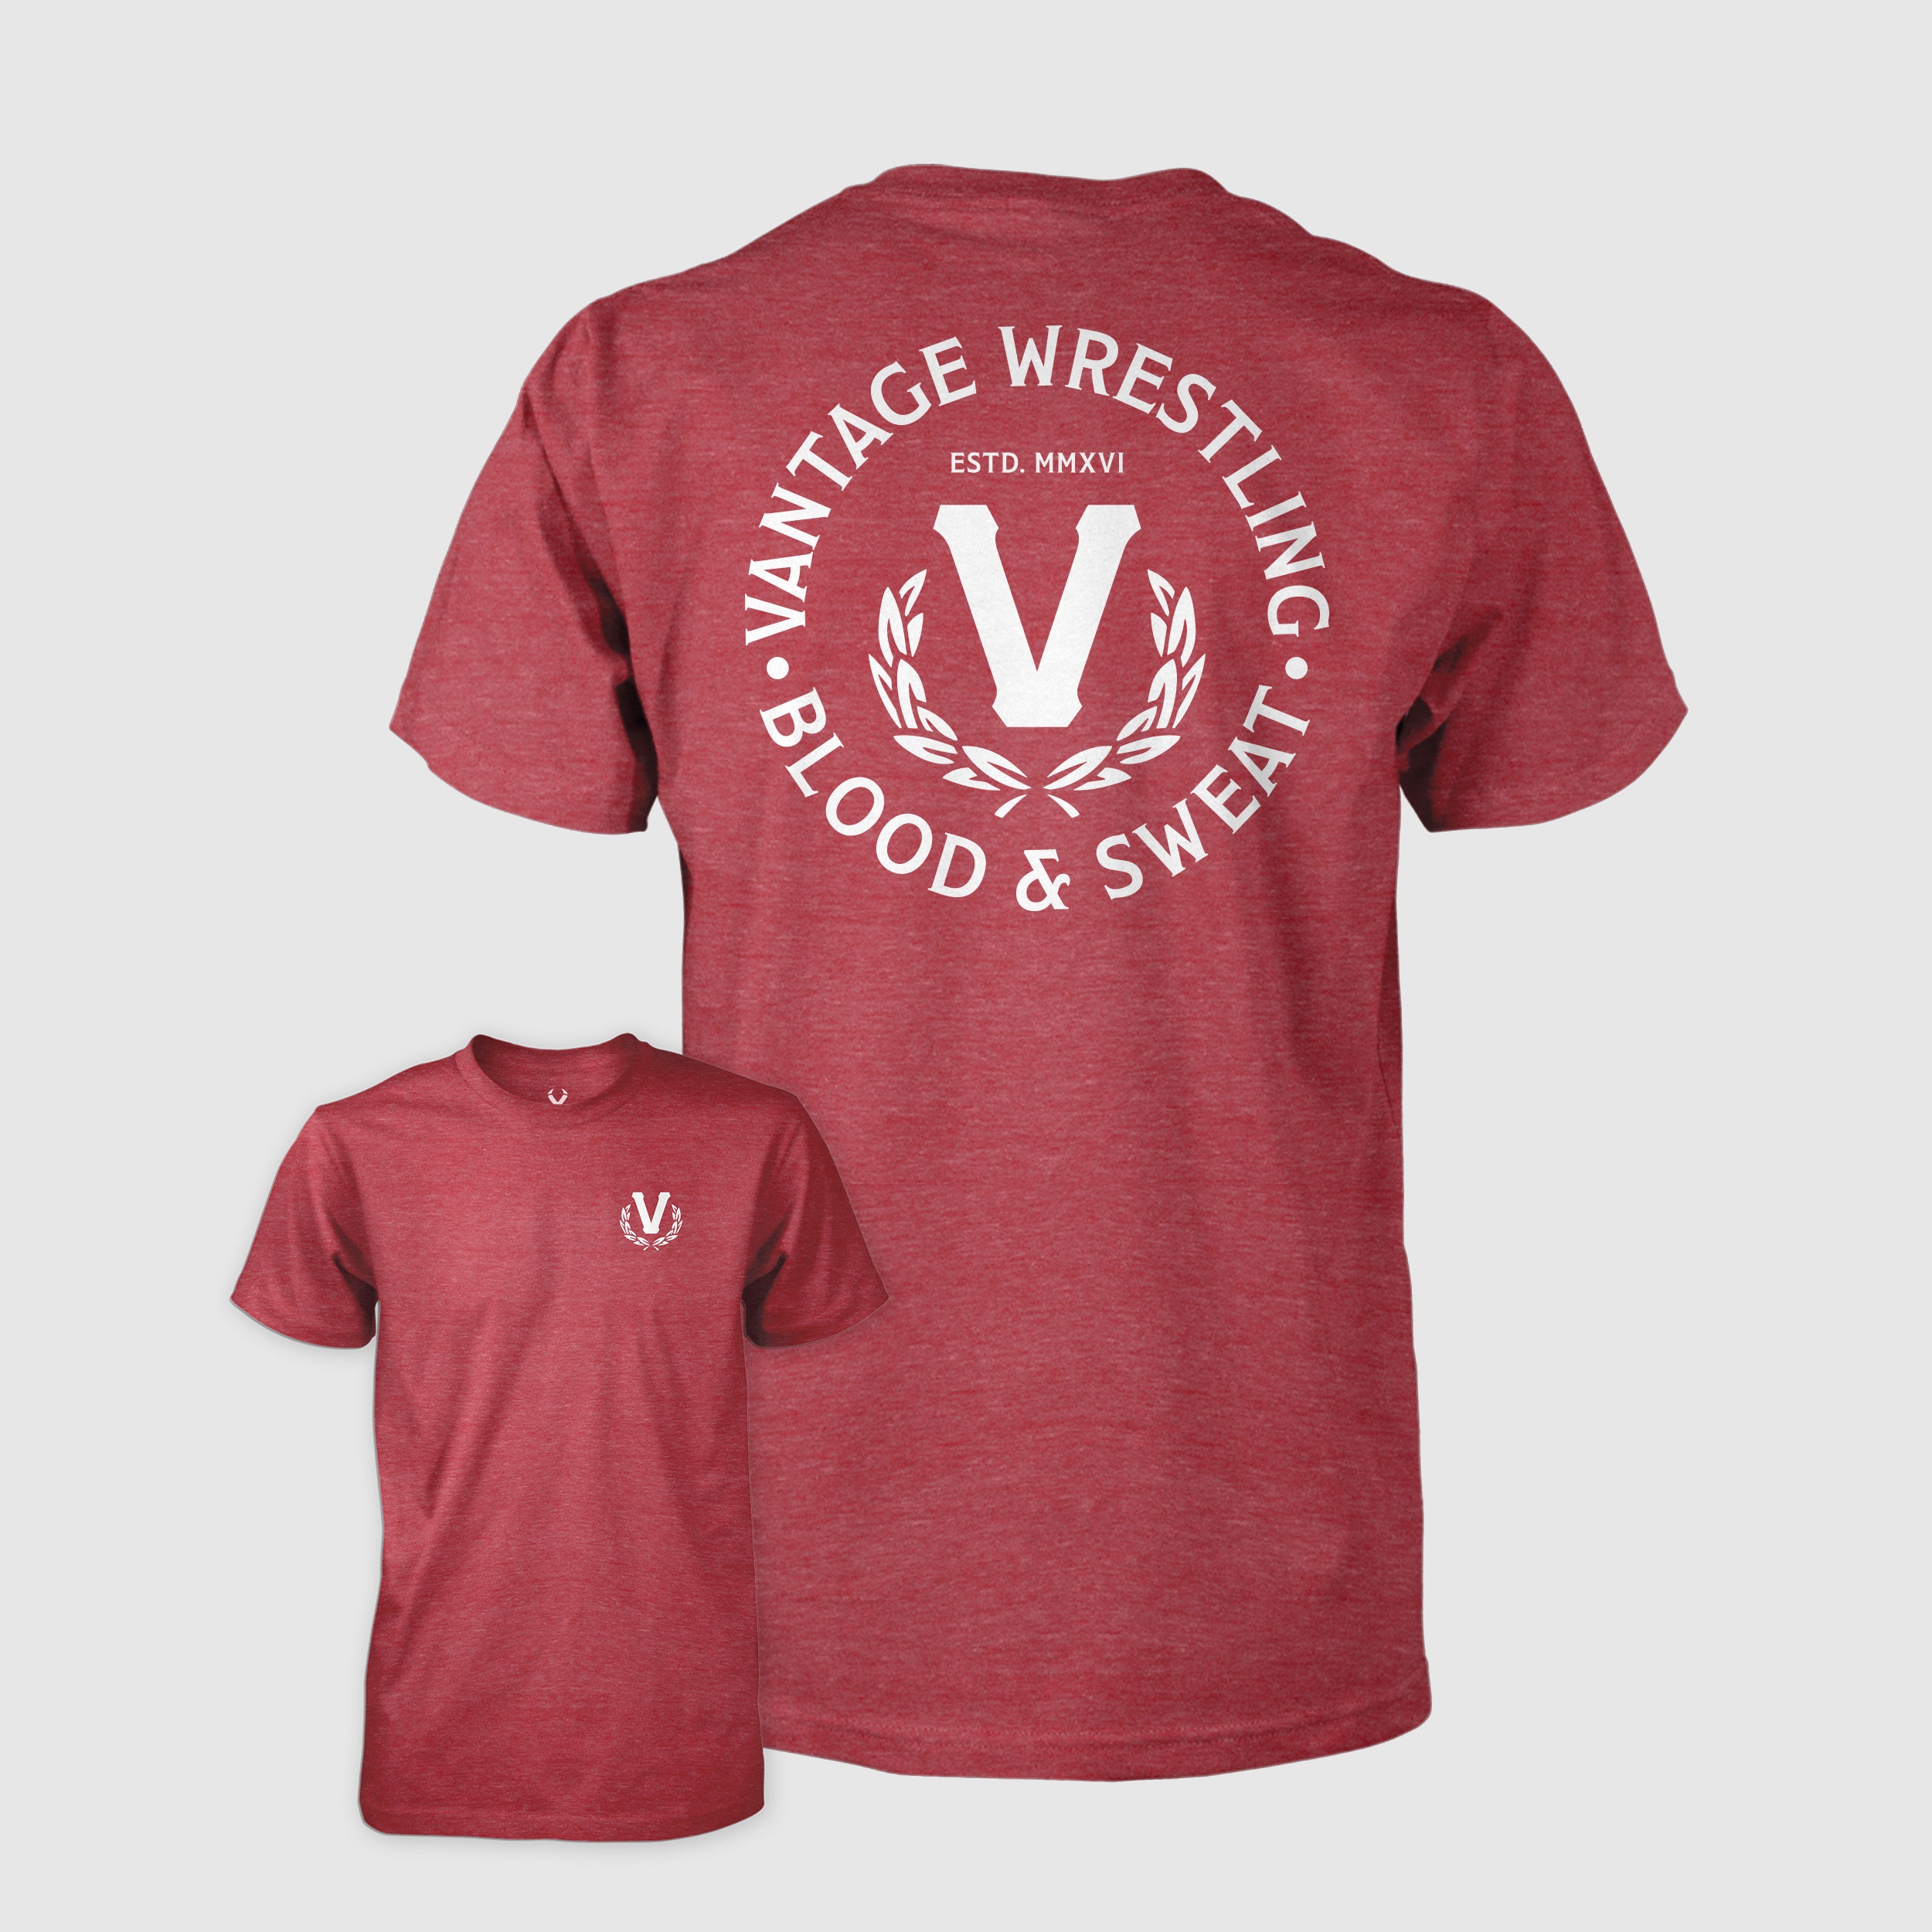 Youth Blood & Sweat Tee (Red)